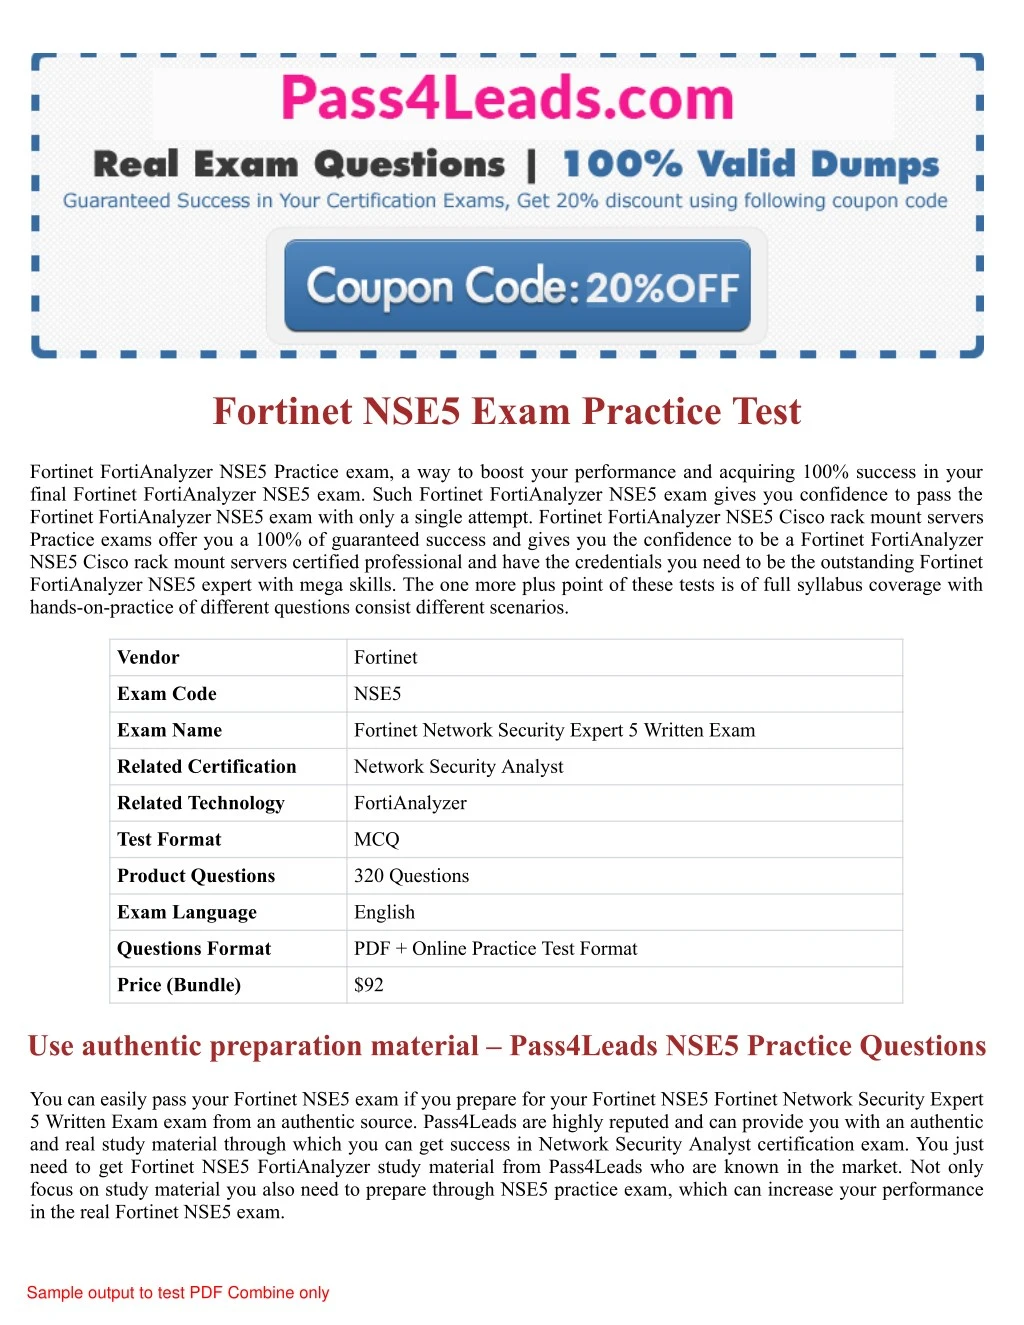 fortinet nse5 exam practice test